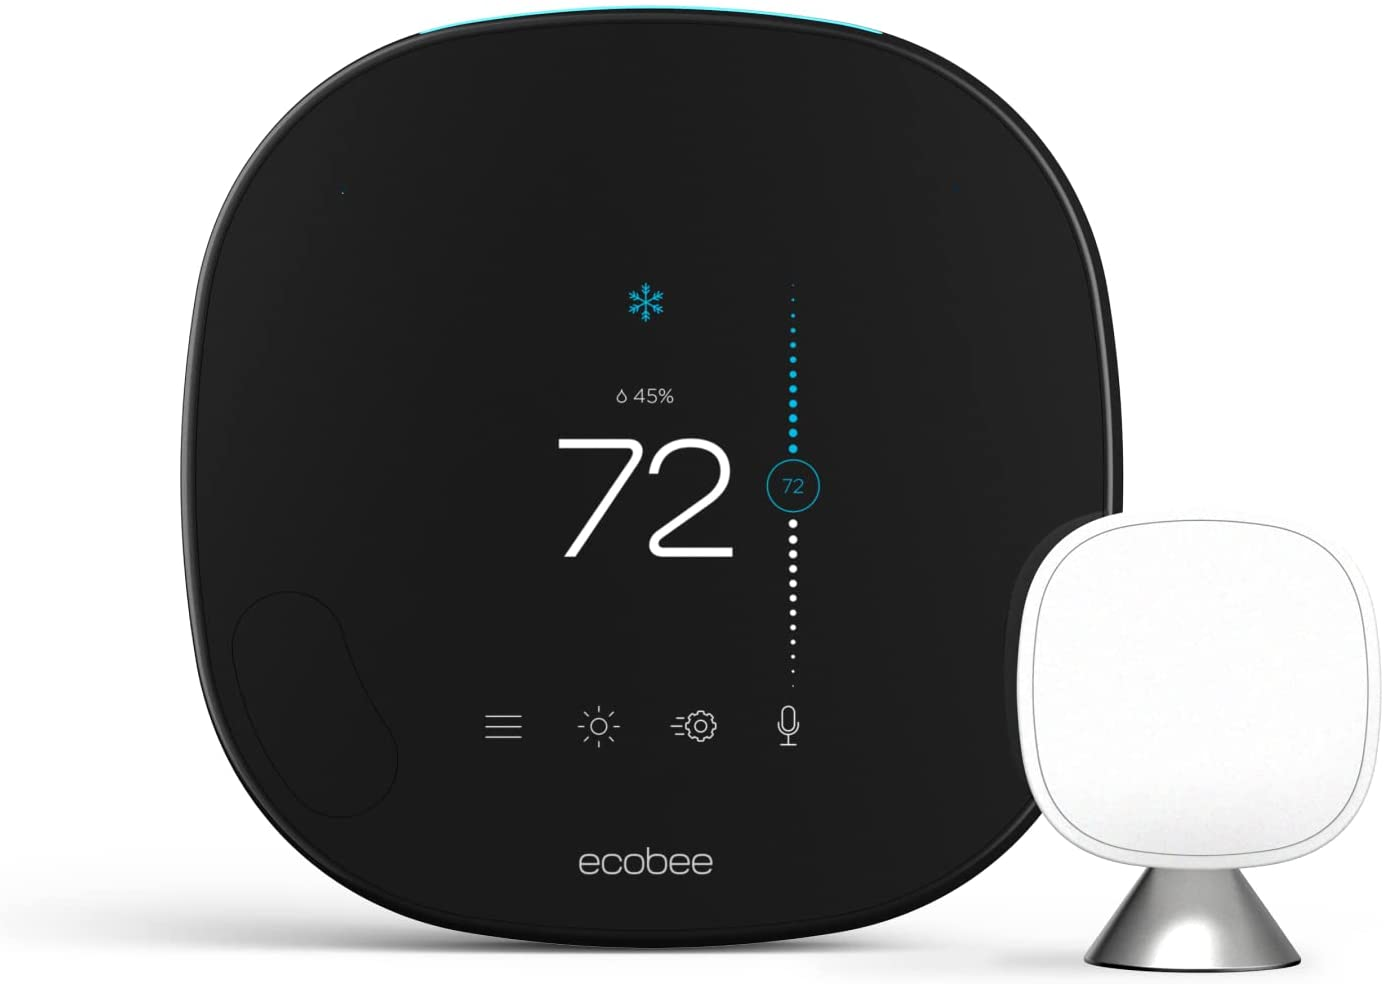 Amazon.com: ecobee SmartThermostat with Voice Control. Model EB-STATE5-01